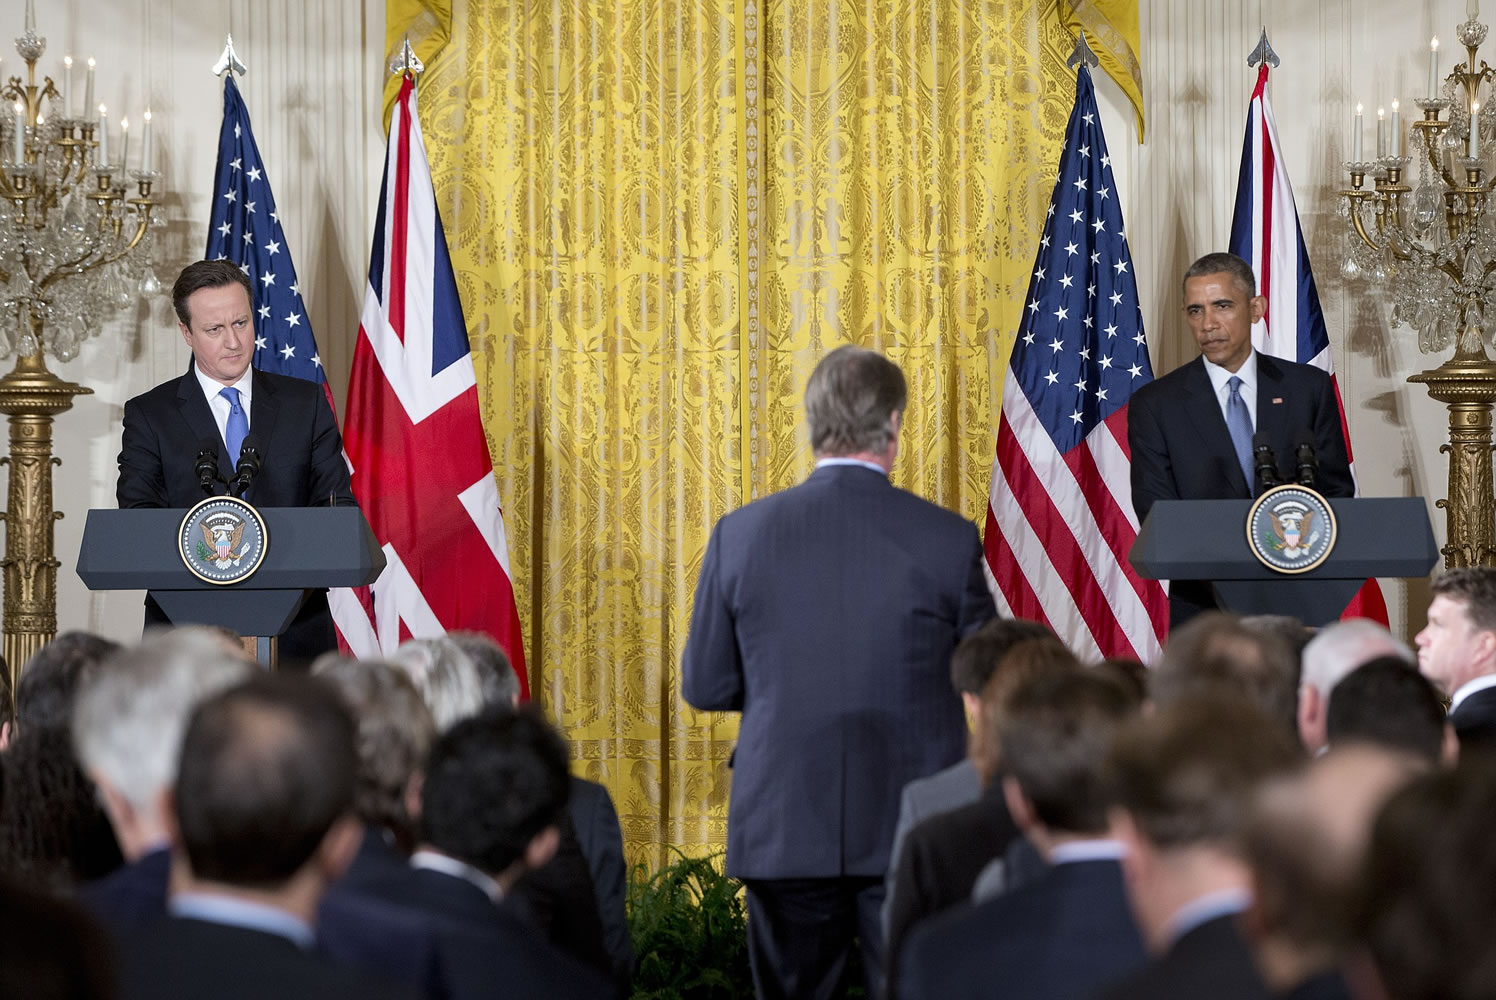 British Prime Minister David Cameron, left, and President Barack Obama hold a ews conference Friday in the East Room of the White House.